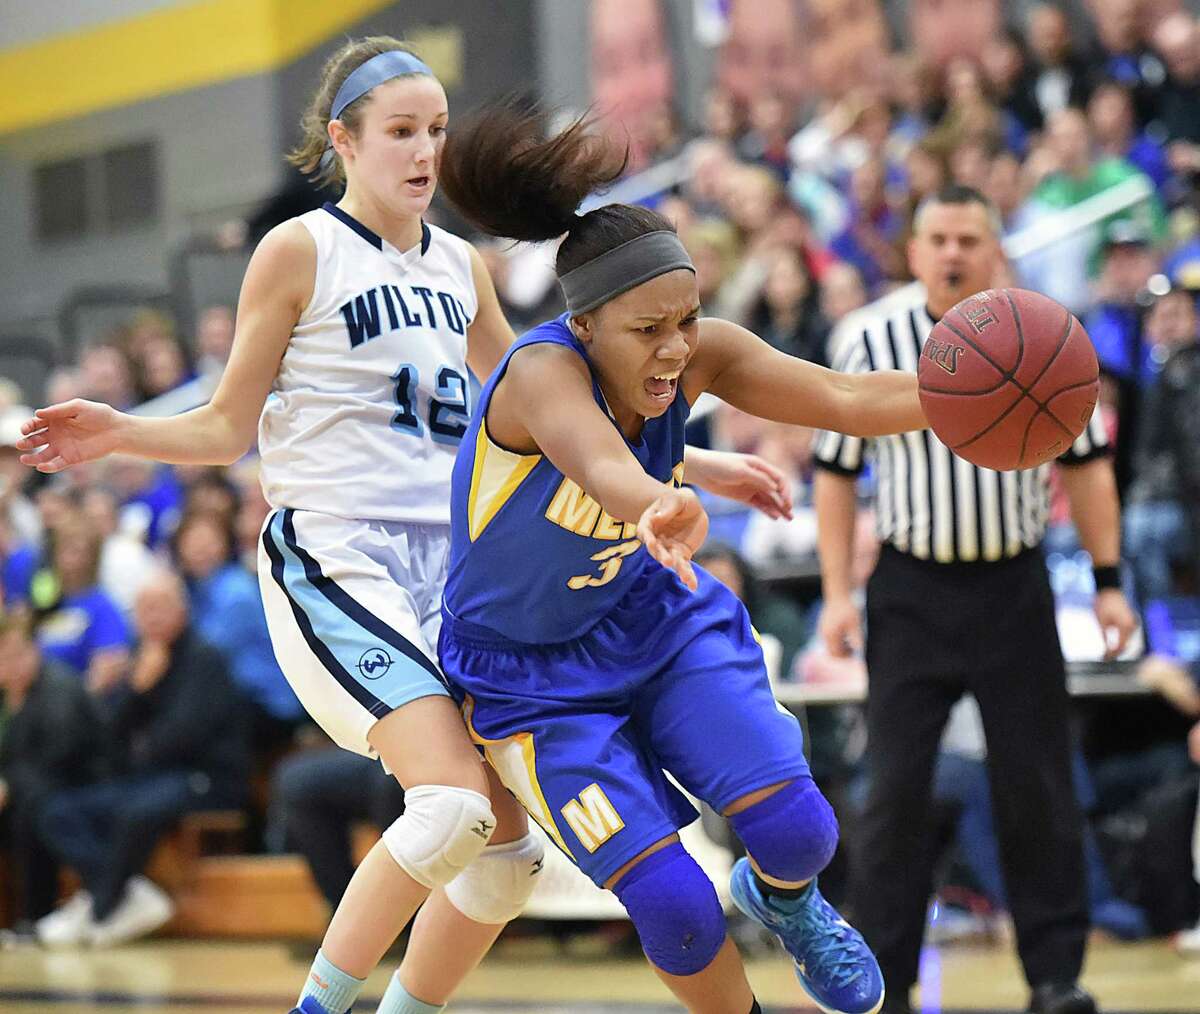 Mercy’s Destine Perry drives to the paint around Wilton’s Haley English in the CIAC Class LL semifinal game, Monday, March 16, 2015, at Jonathan Law High School in Milford. The Wilton Warriors defeated the Mercy Tigers, 55-54. (Catherine Avalone/New Haven Register)